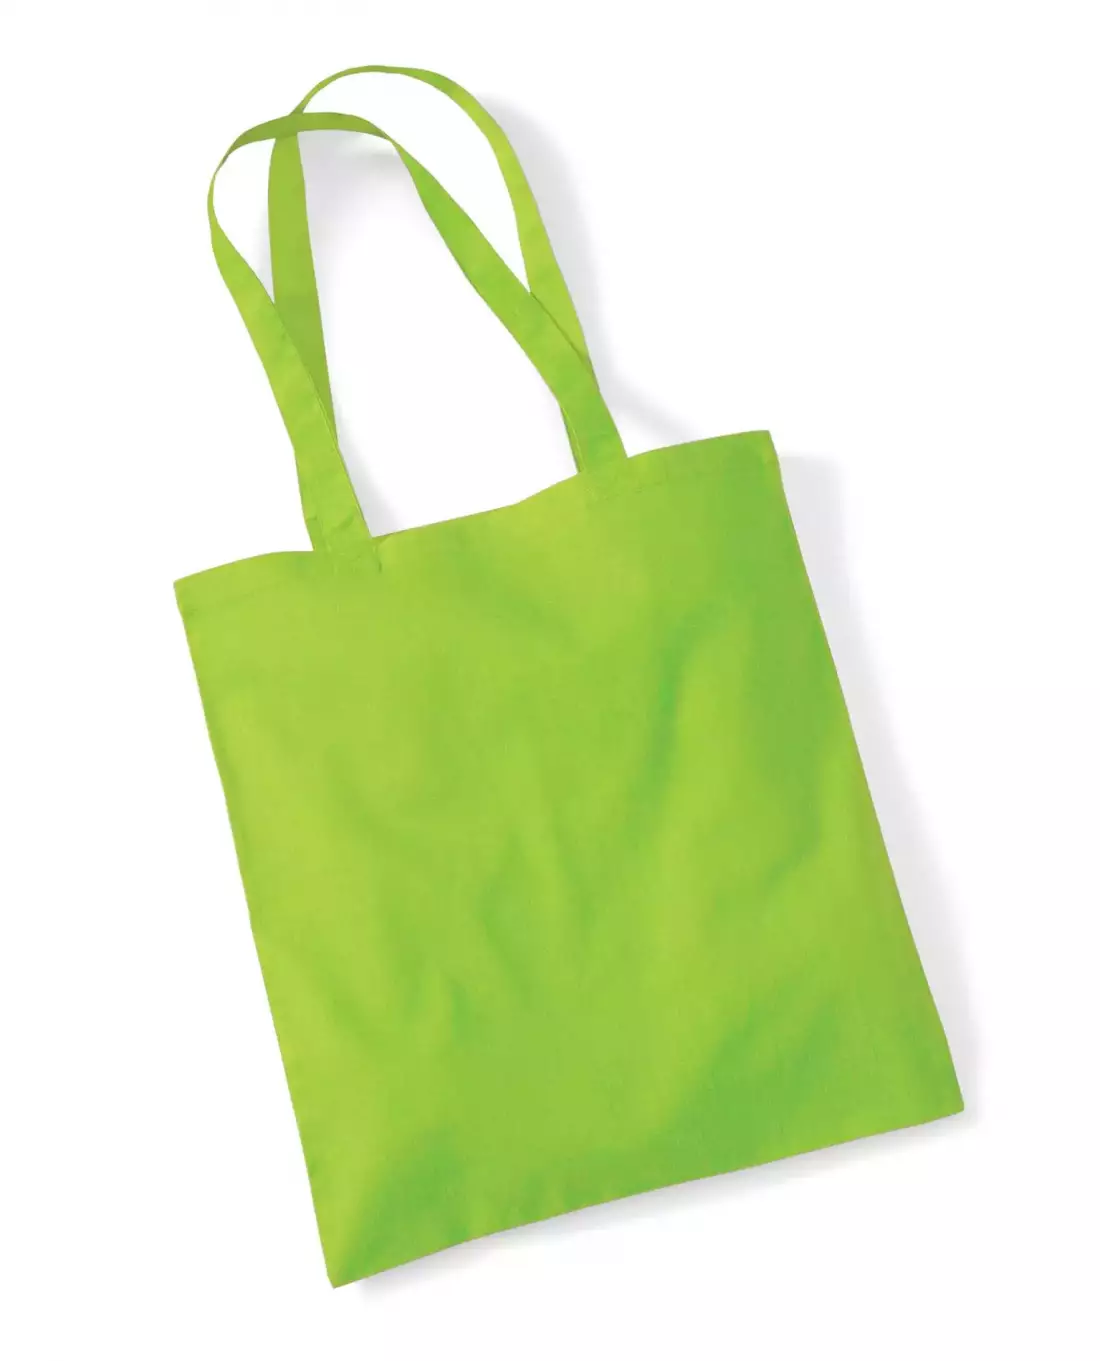 BAG FOR LIFE PUUVILLAKASSI 10 L, Lime